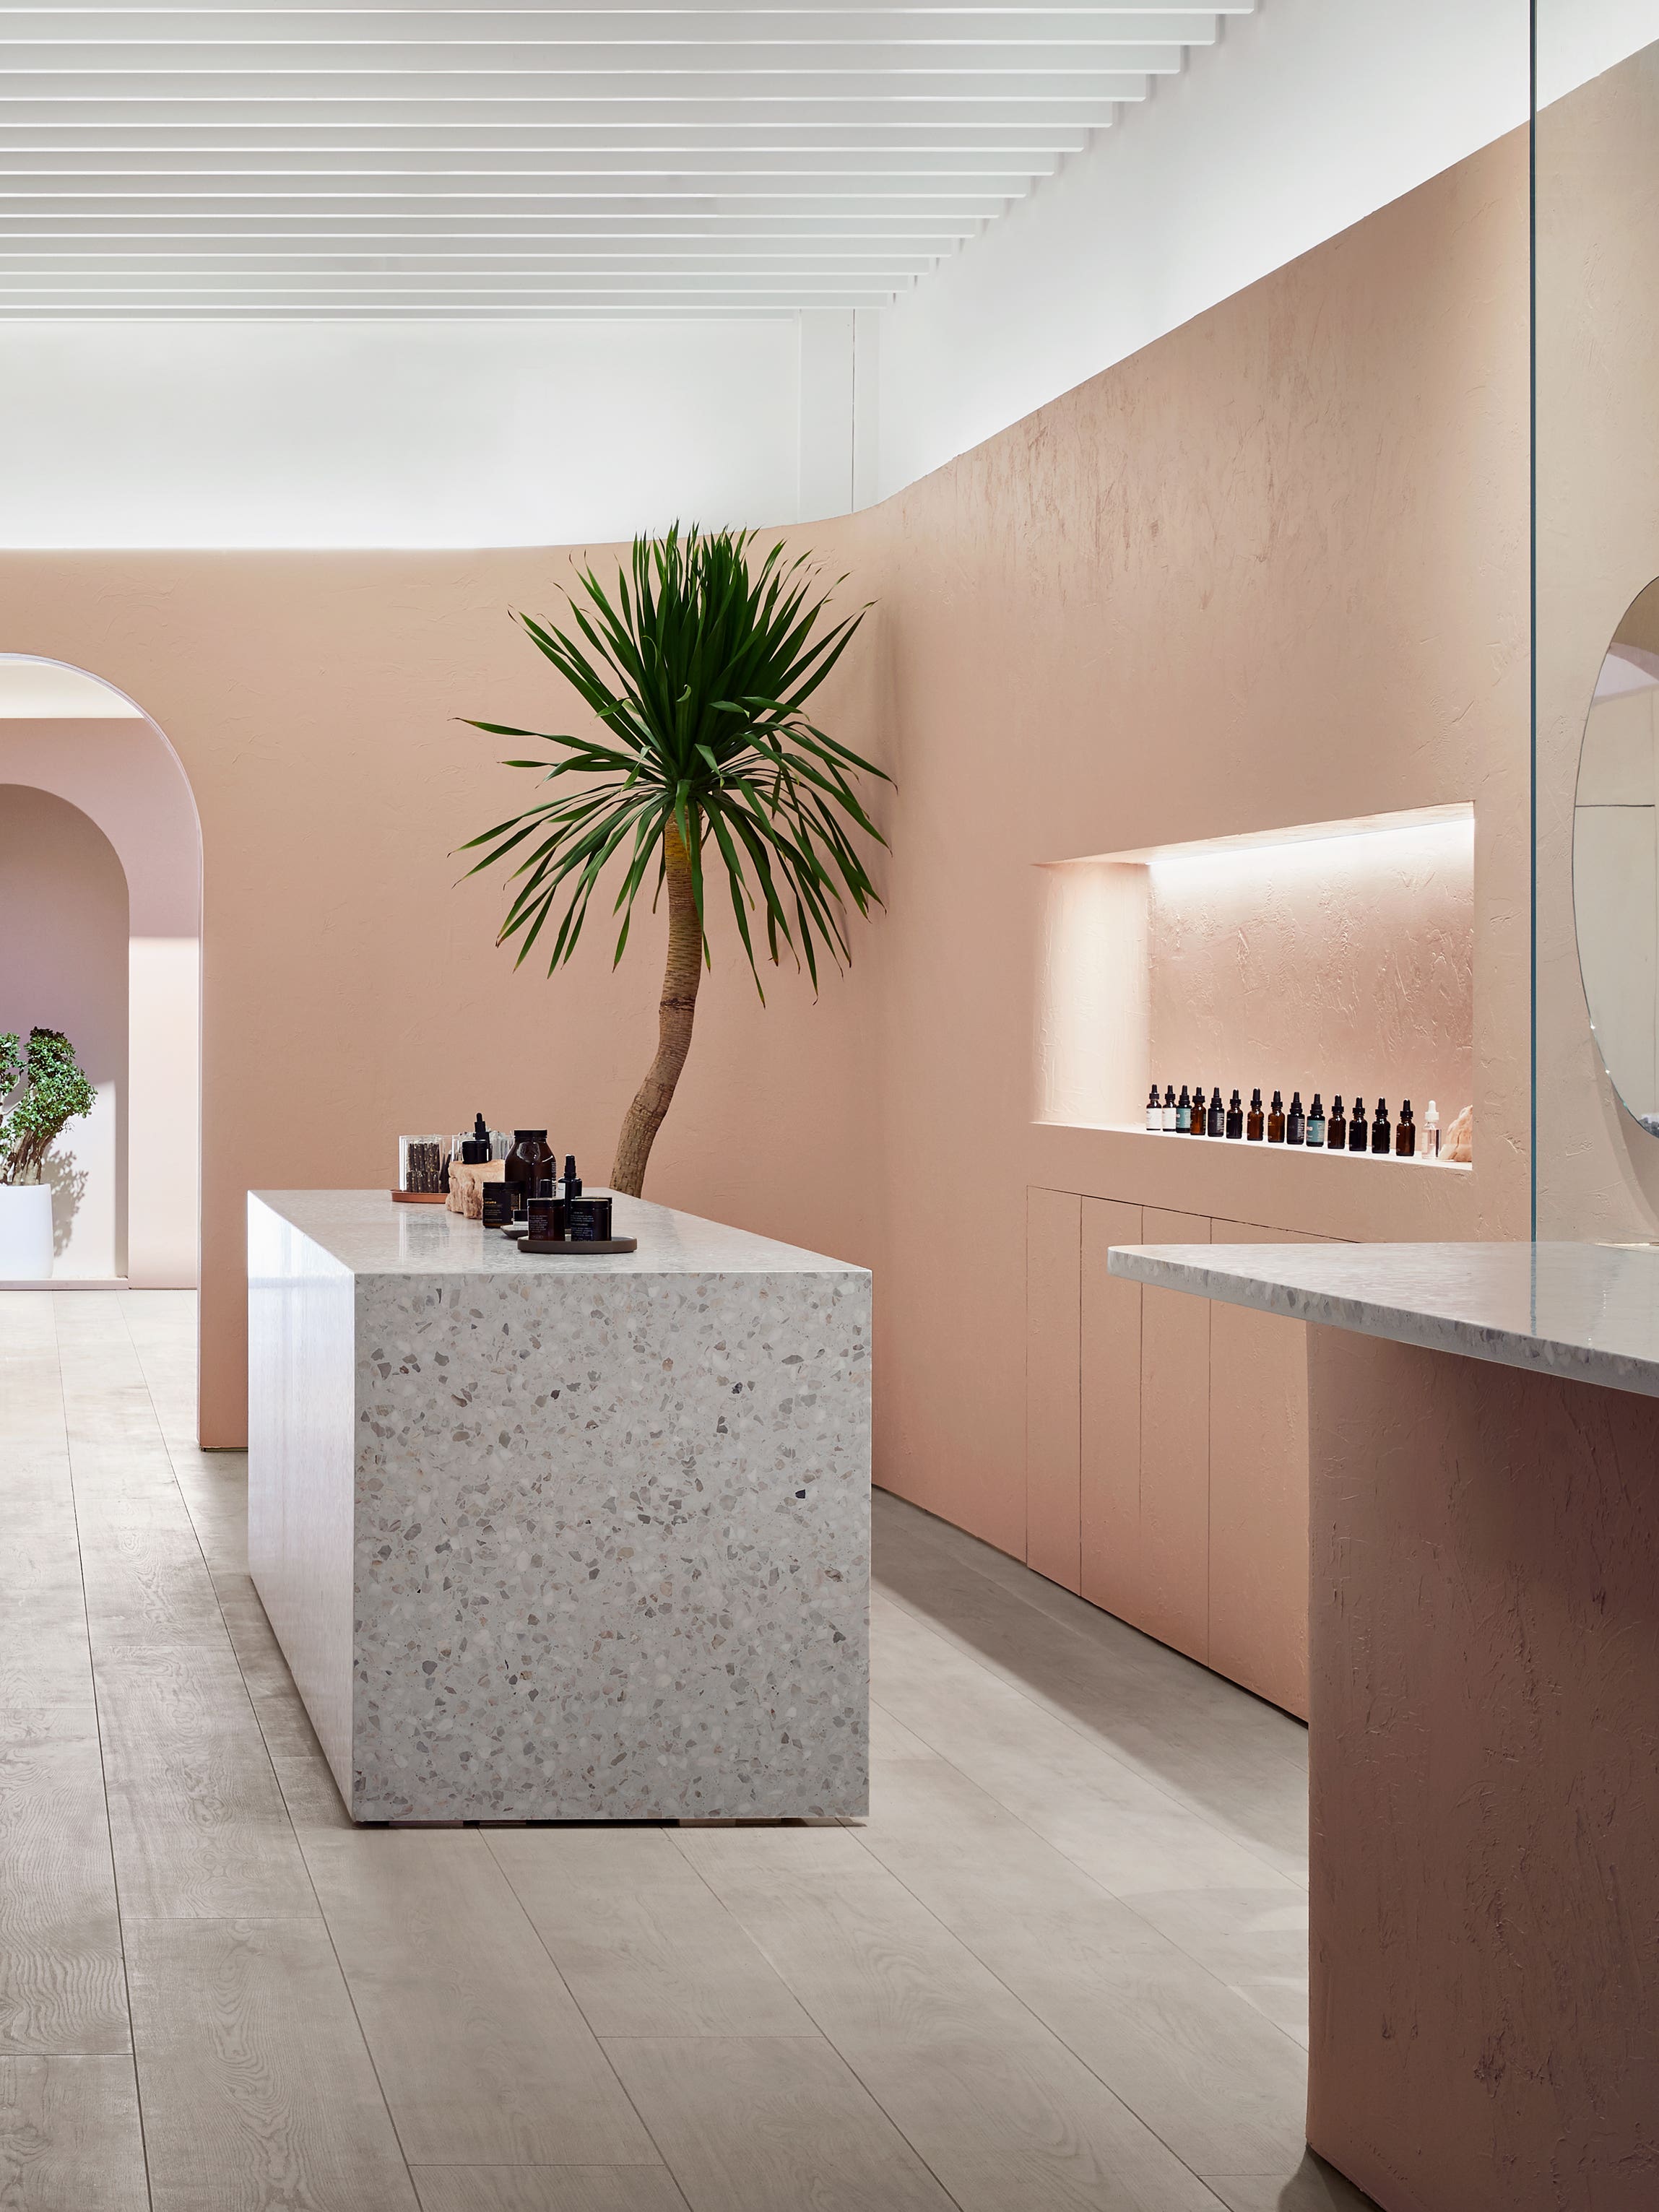 Standard Dose’s Debut CBD Store Is a Visual Treat for the Senses